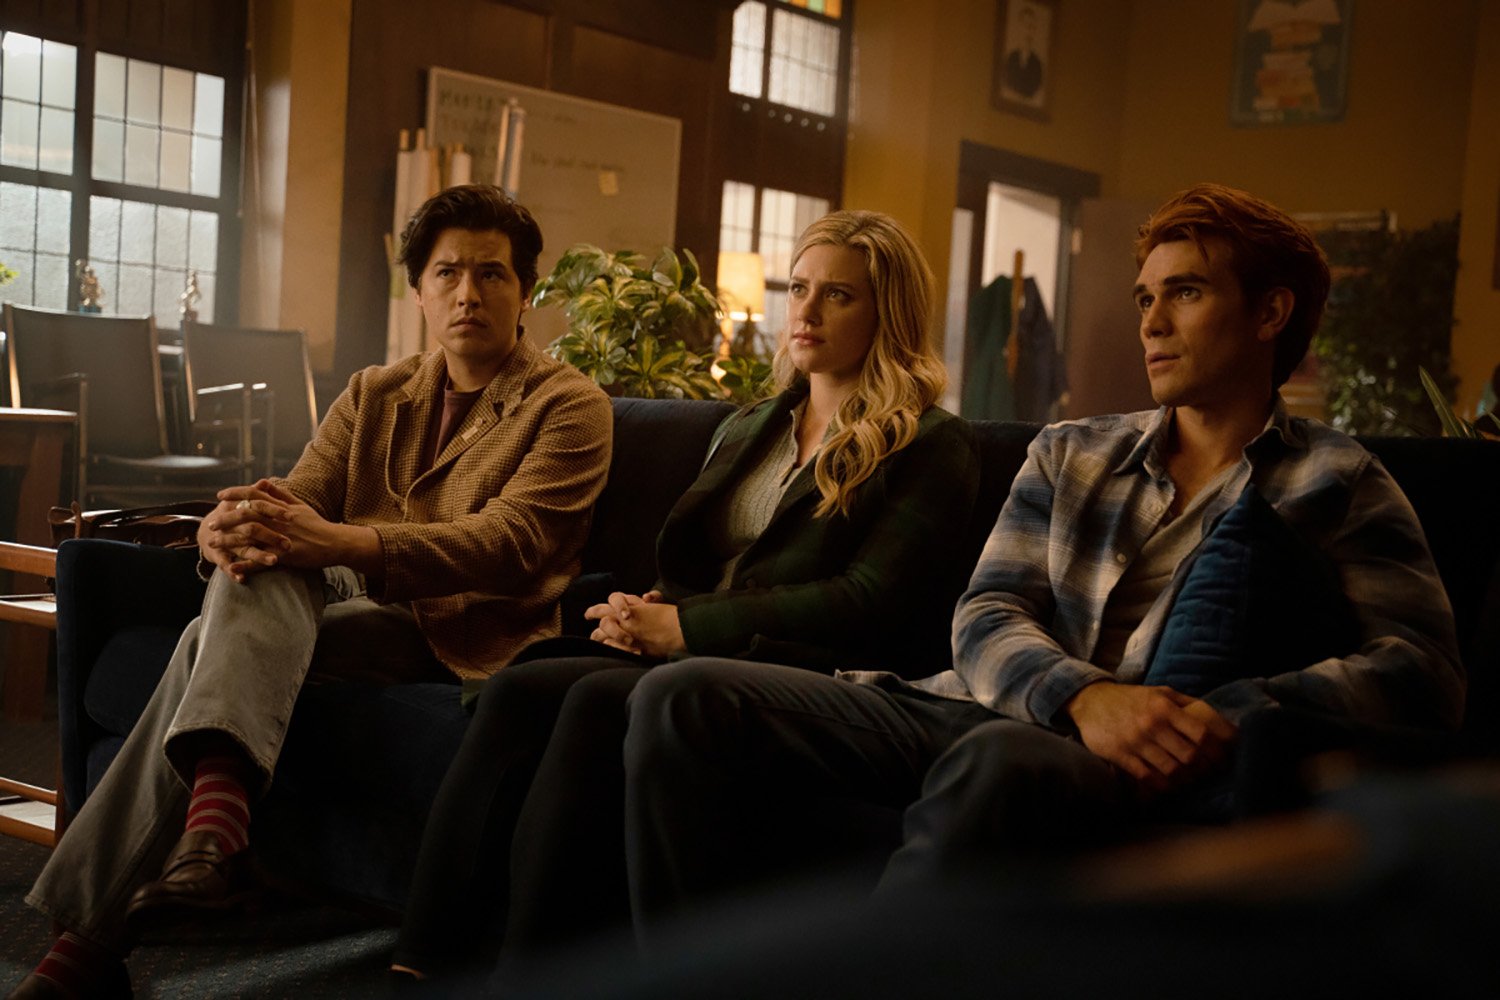 Cole Sprouse as Jughead Jones, Lili Reinhart as Betty Cooper, and KJ Apa as Archie Andrews on Riverdale Season 6, which sees the return of the Trash Bag Killer or TBK